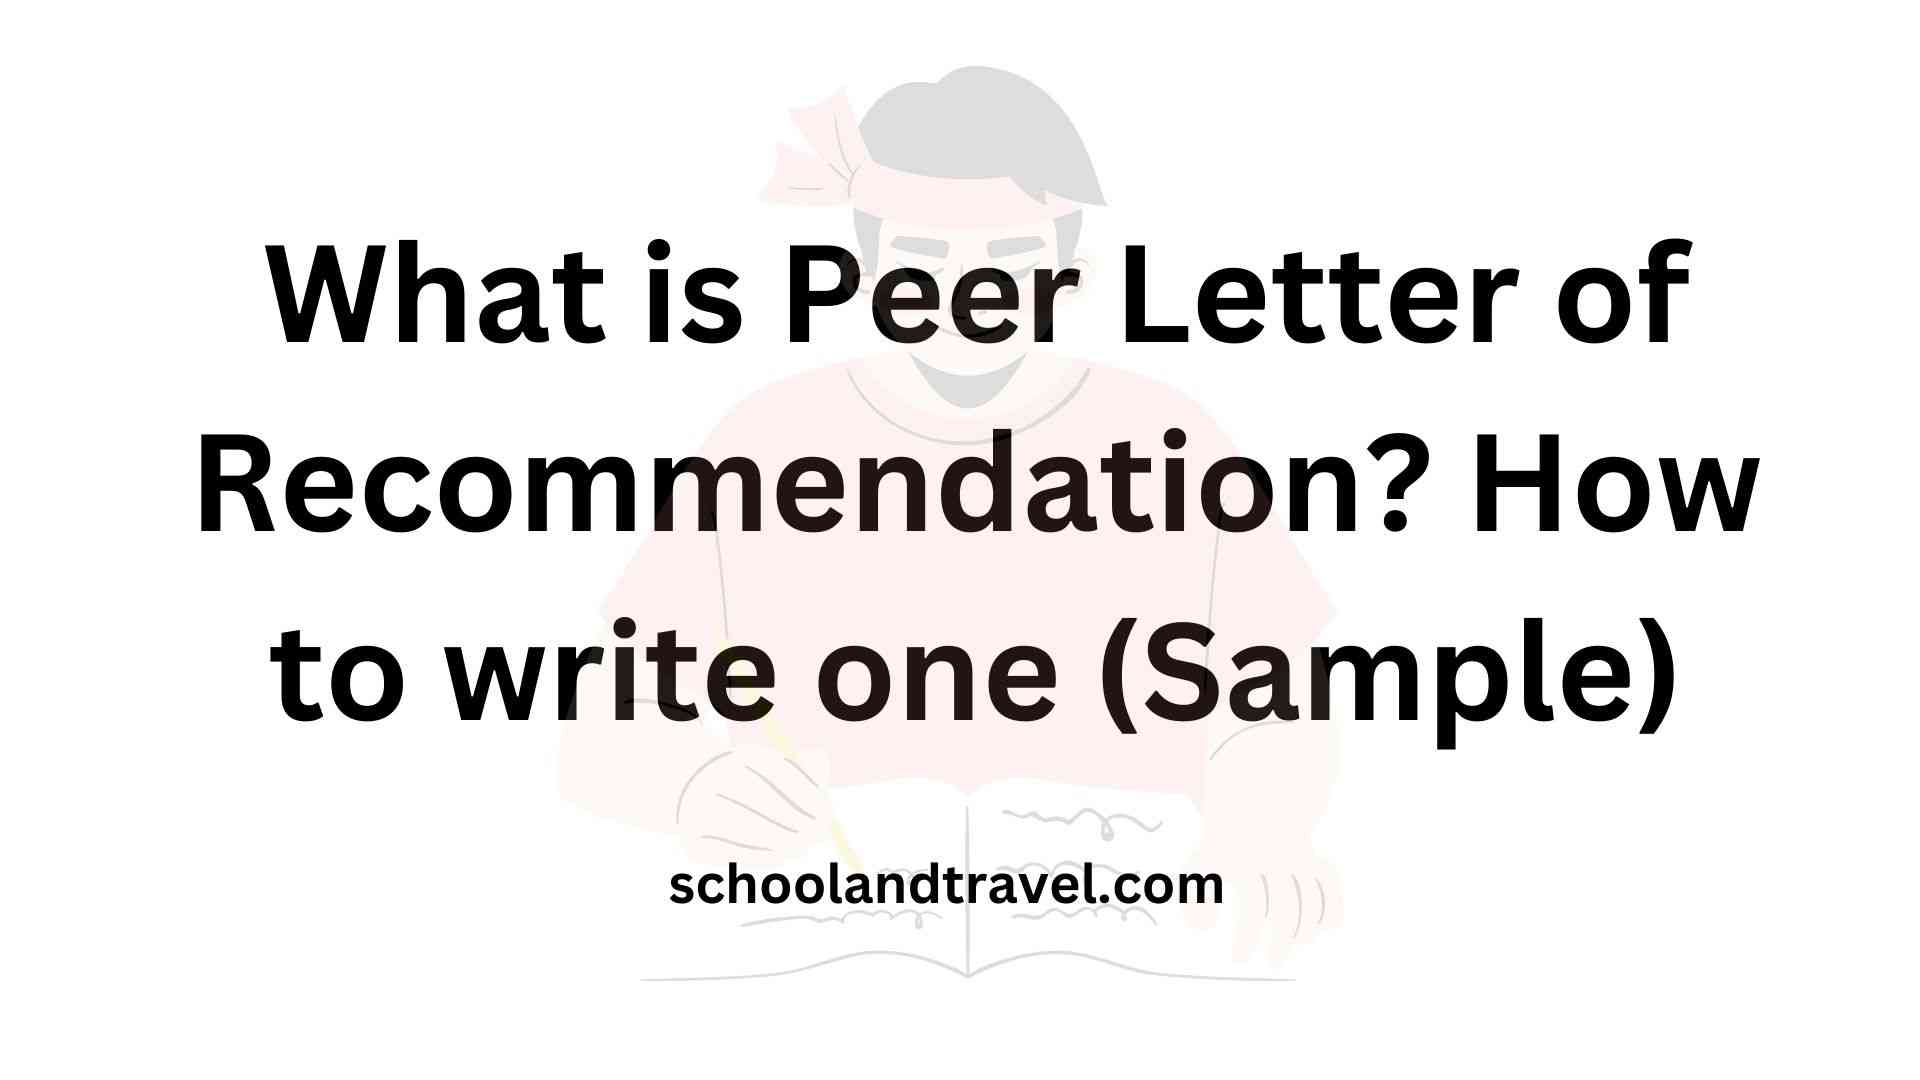 Peer Letter of Recommendation